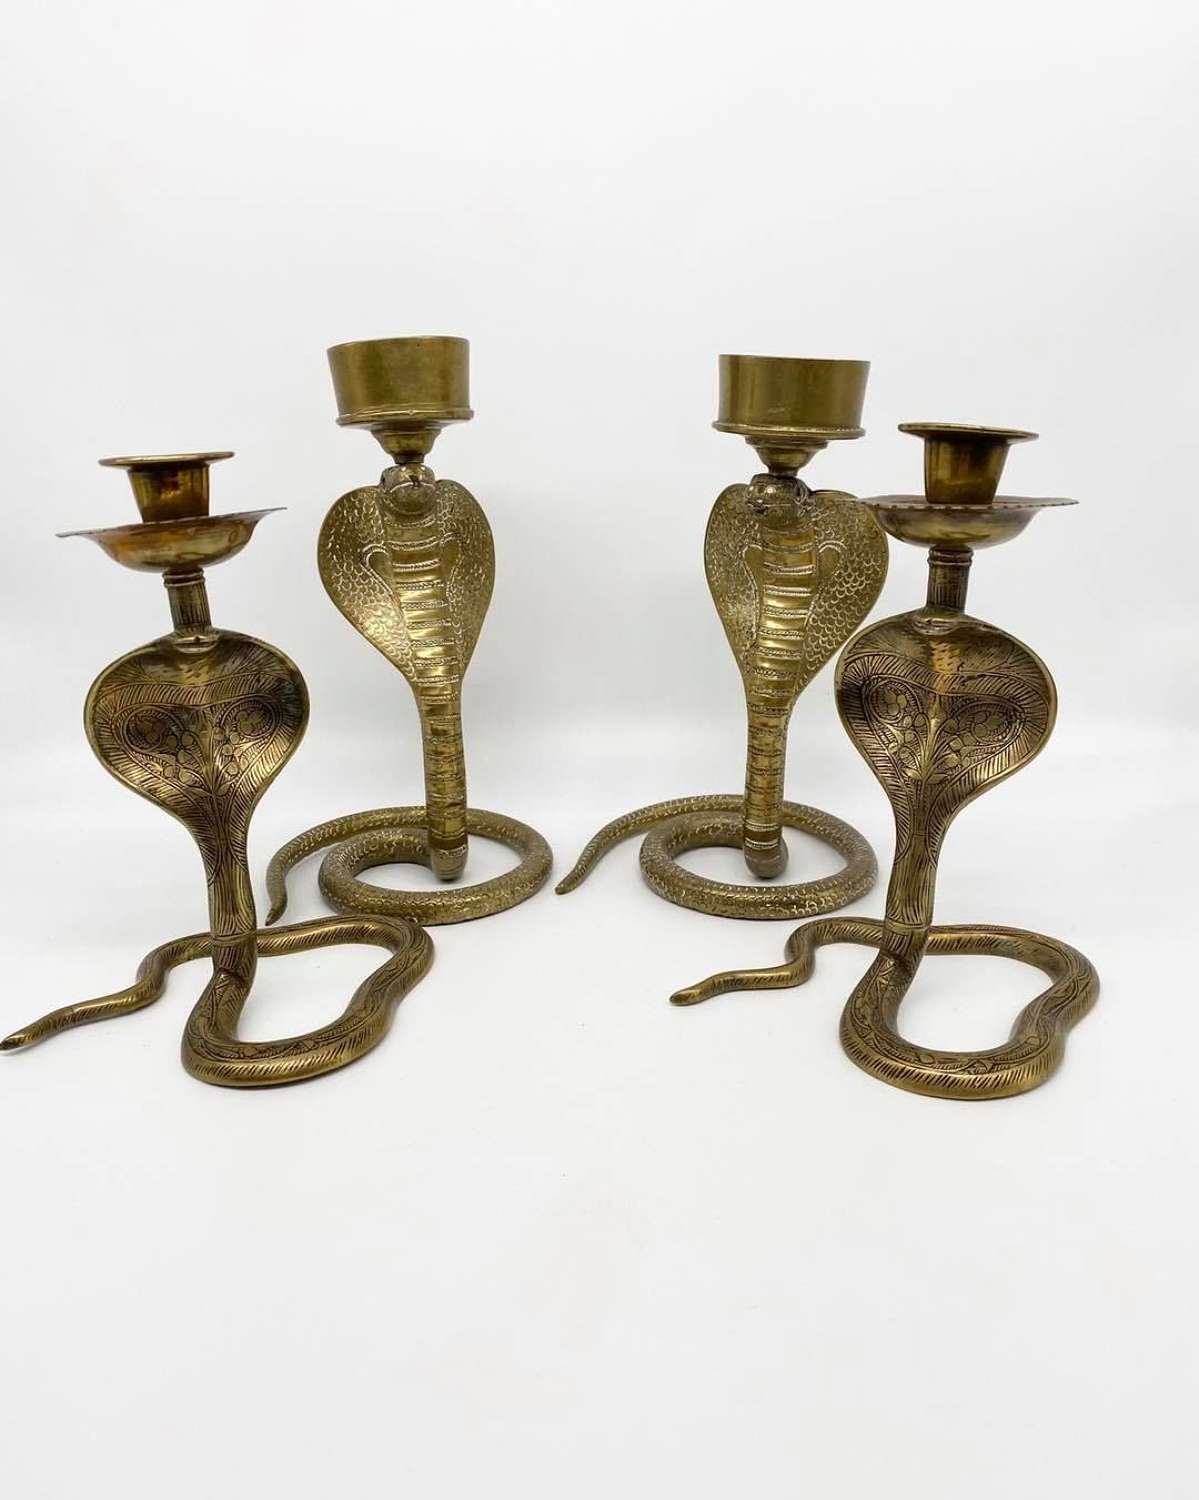 Two Pairs of Serpent Candlestick Holders